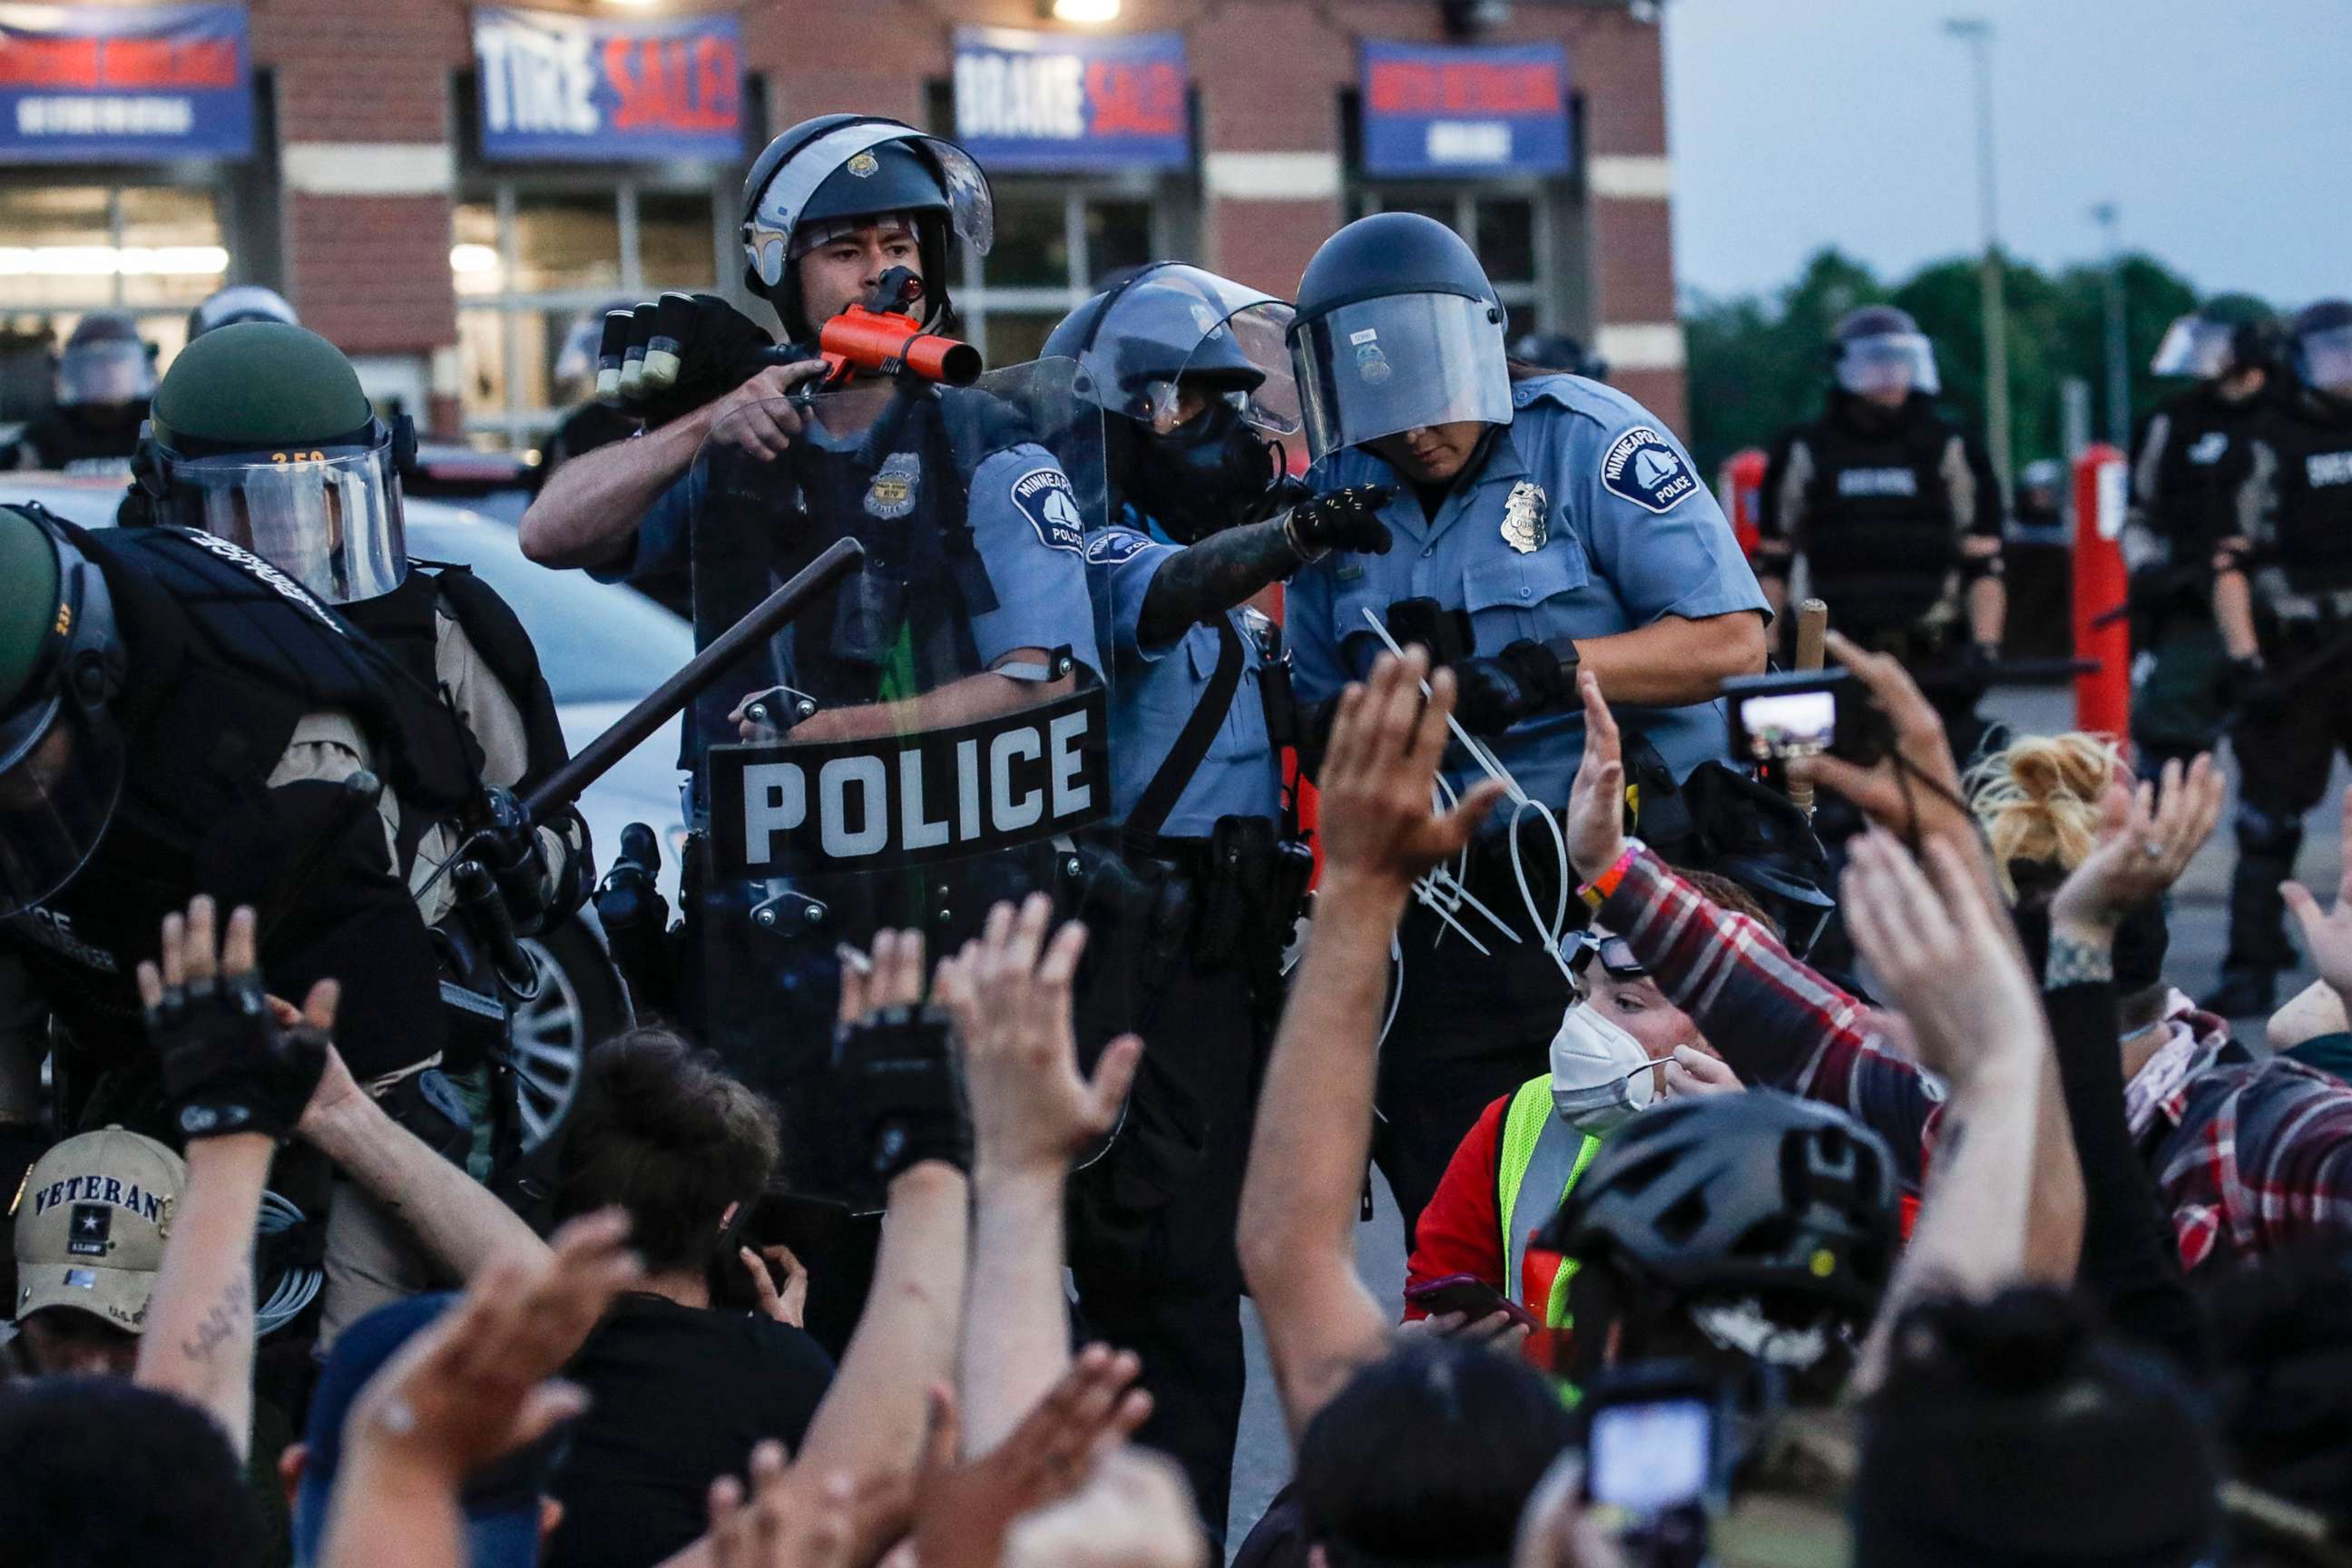 PHOTO: In this May 31, 2020, file photo, a police officer points a hand cannon at protesters who have been detained pending arrest on South Washington Street, in Minneapolis.